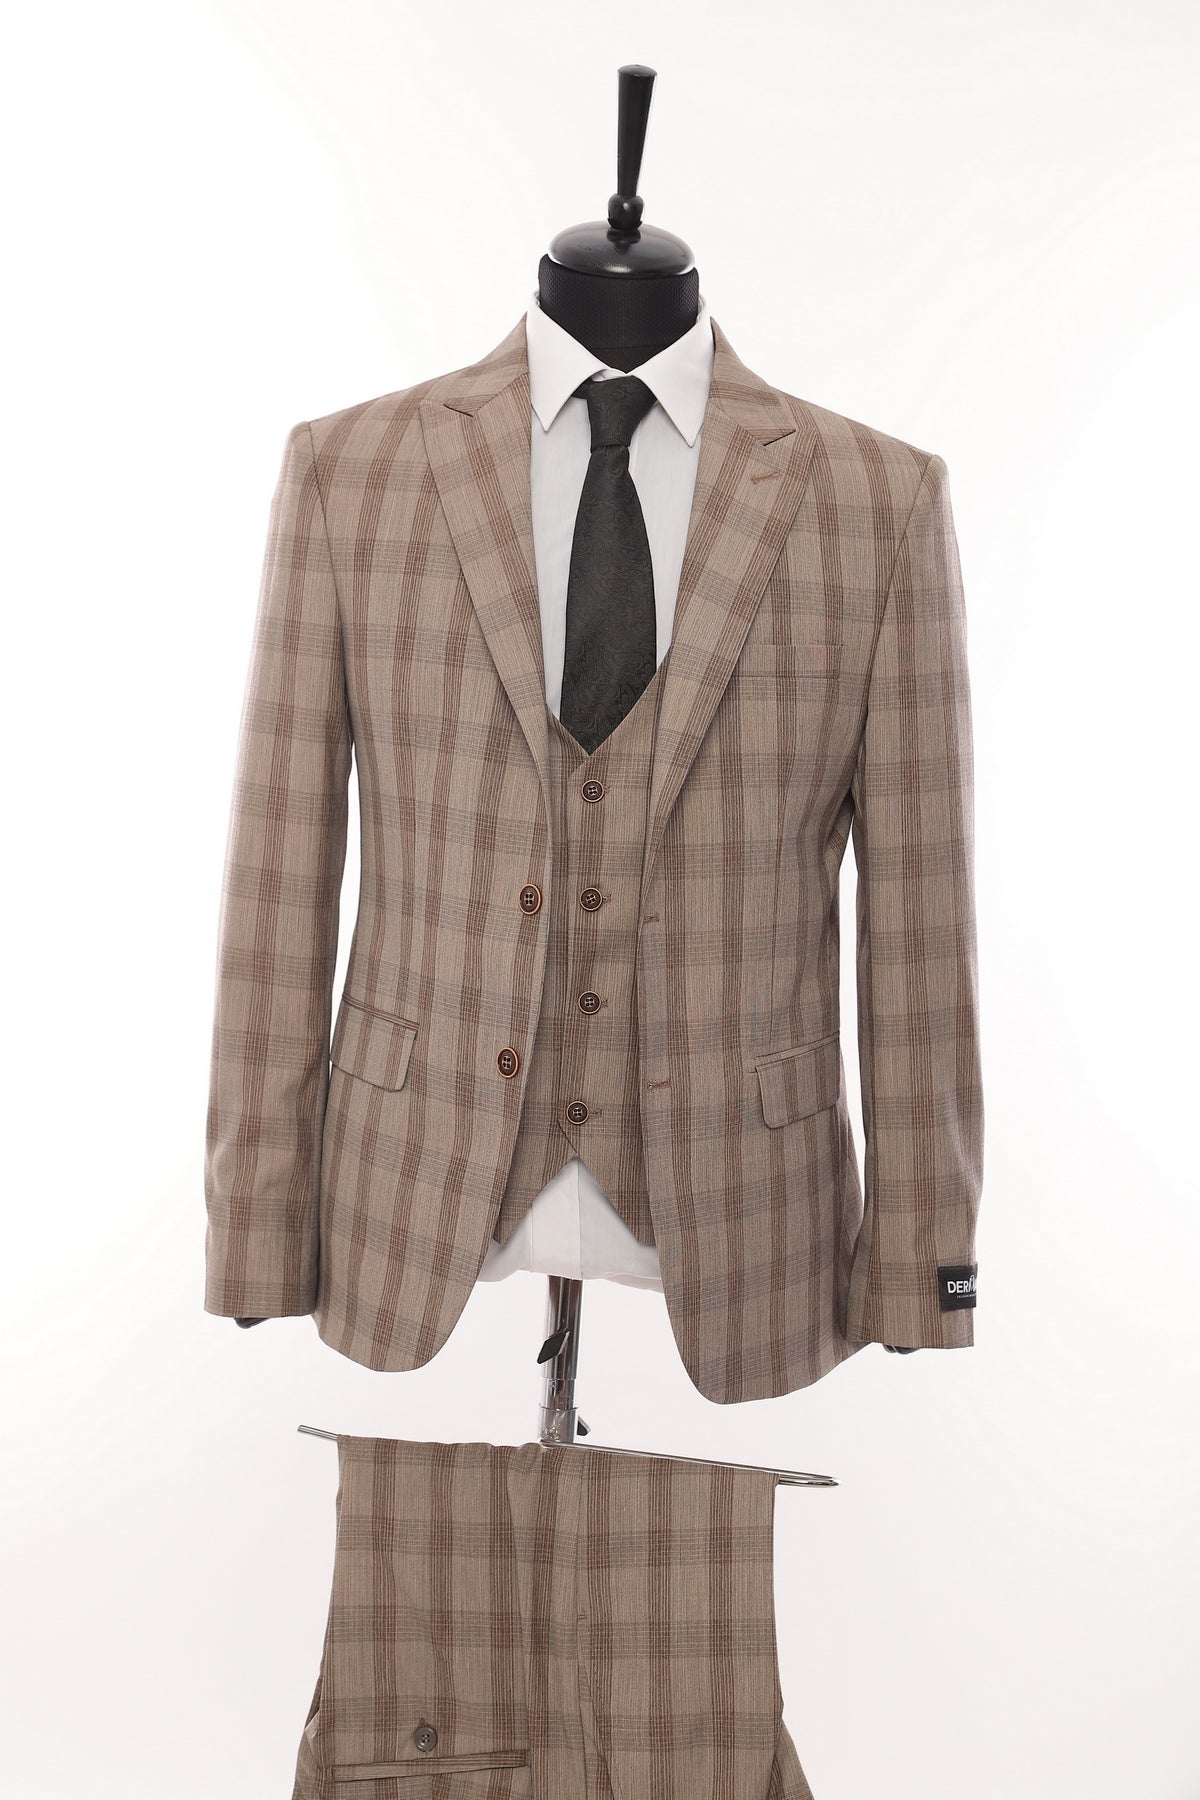 Brown Square Patterned Fabric 3 Piece Double Breasted Suit